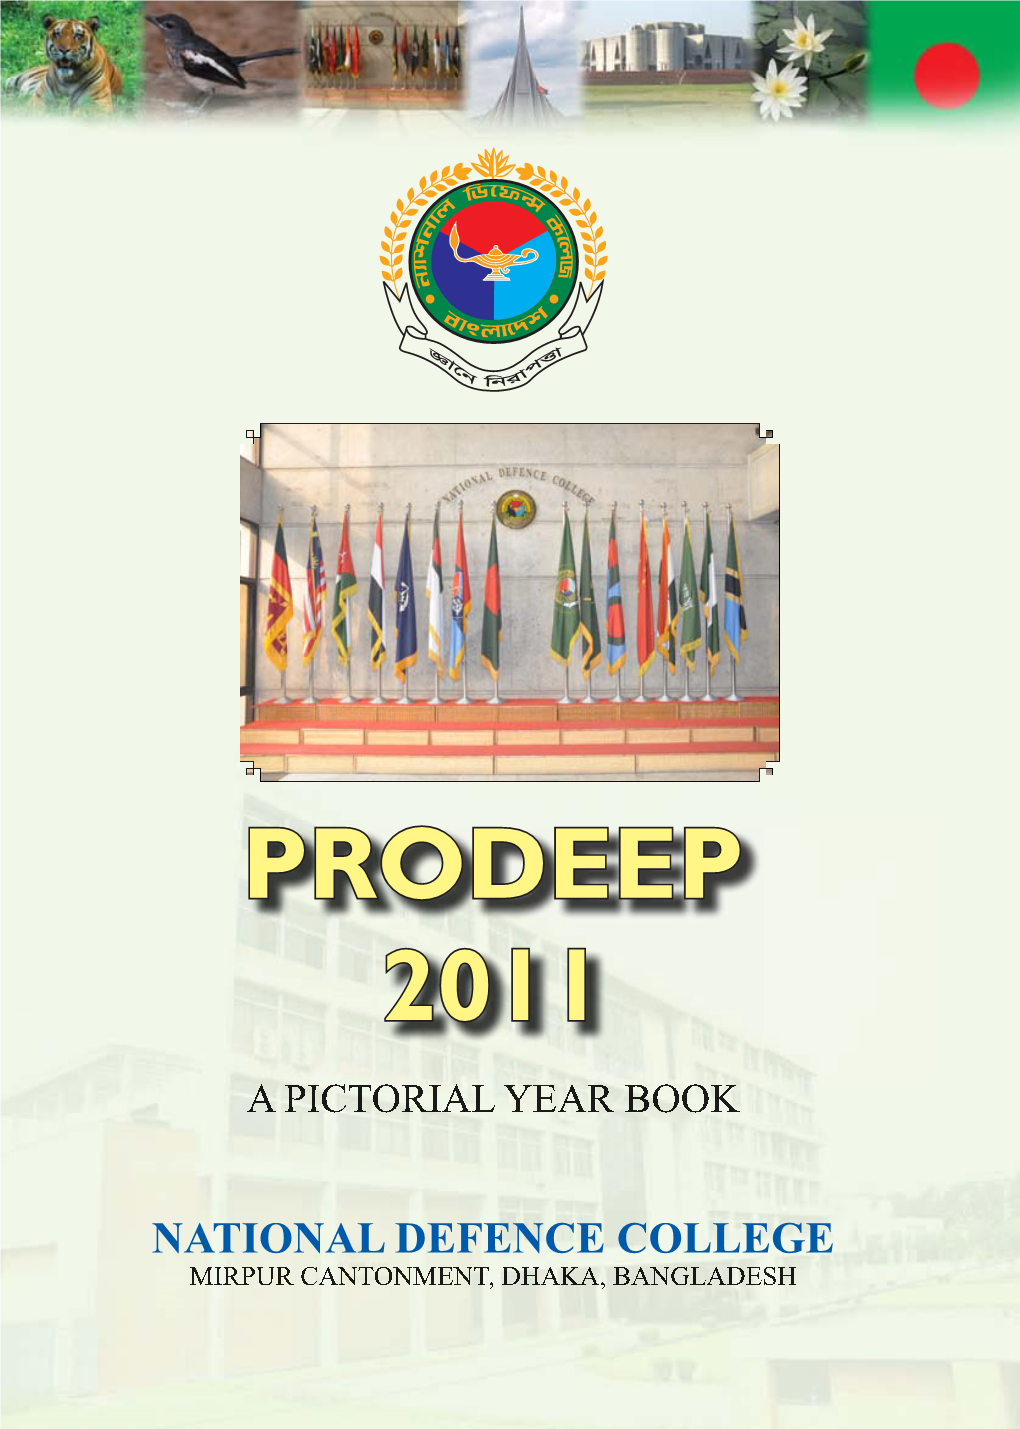 Prodeep 2011 a Pictorial Year Book